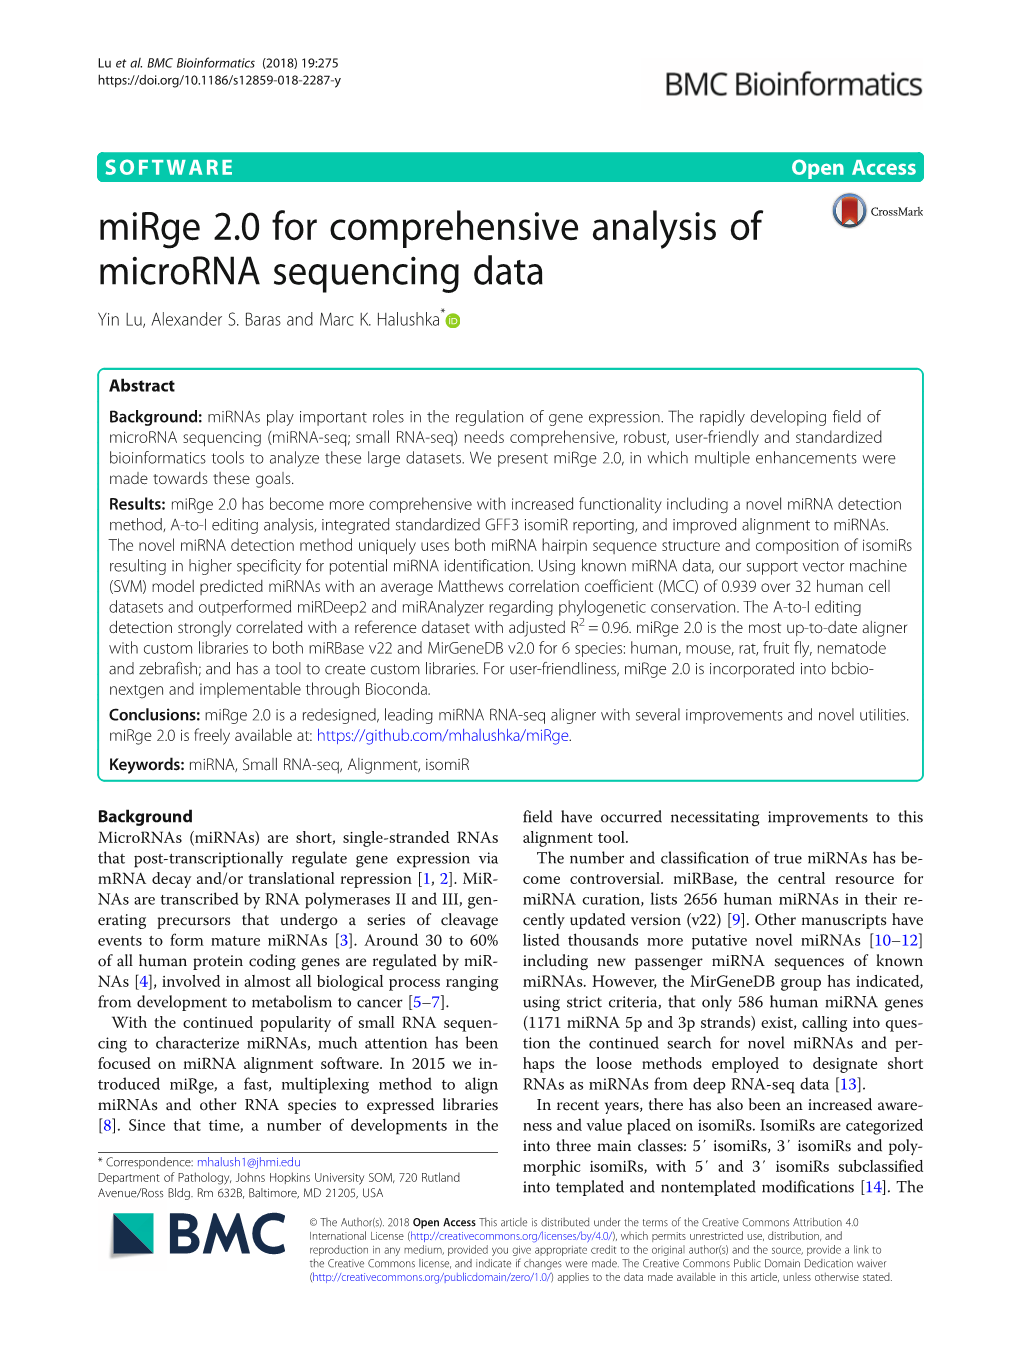 Mirge 2.0 for Comprehensive Analysis of Microrna Sequencing Data Yin Lu, Alexander S